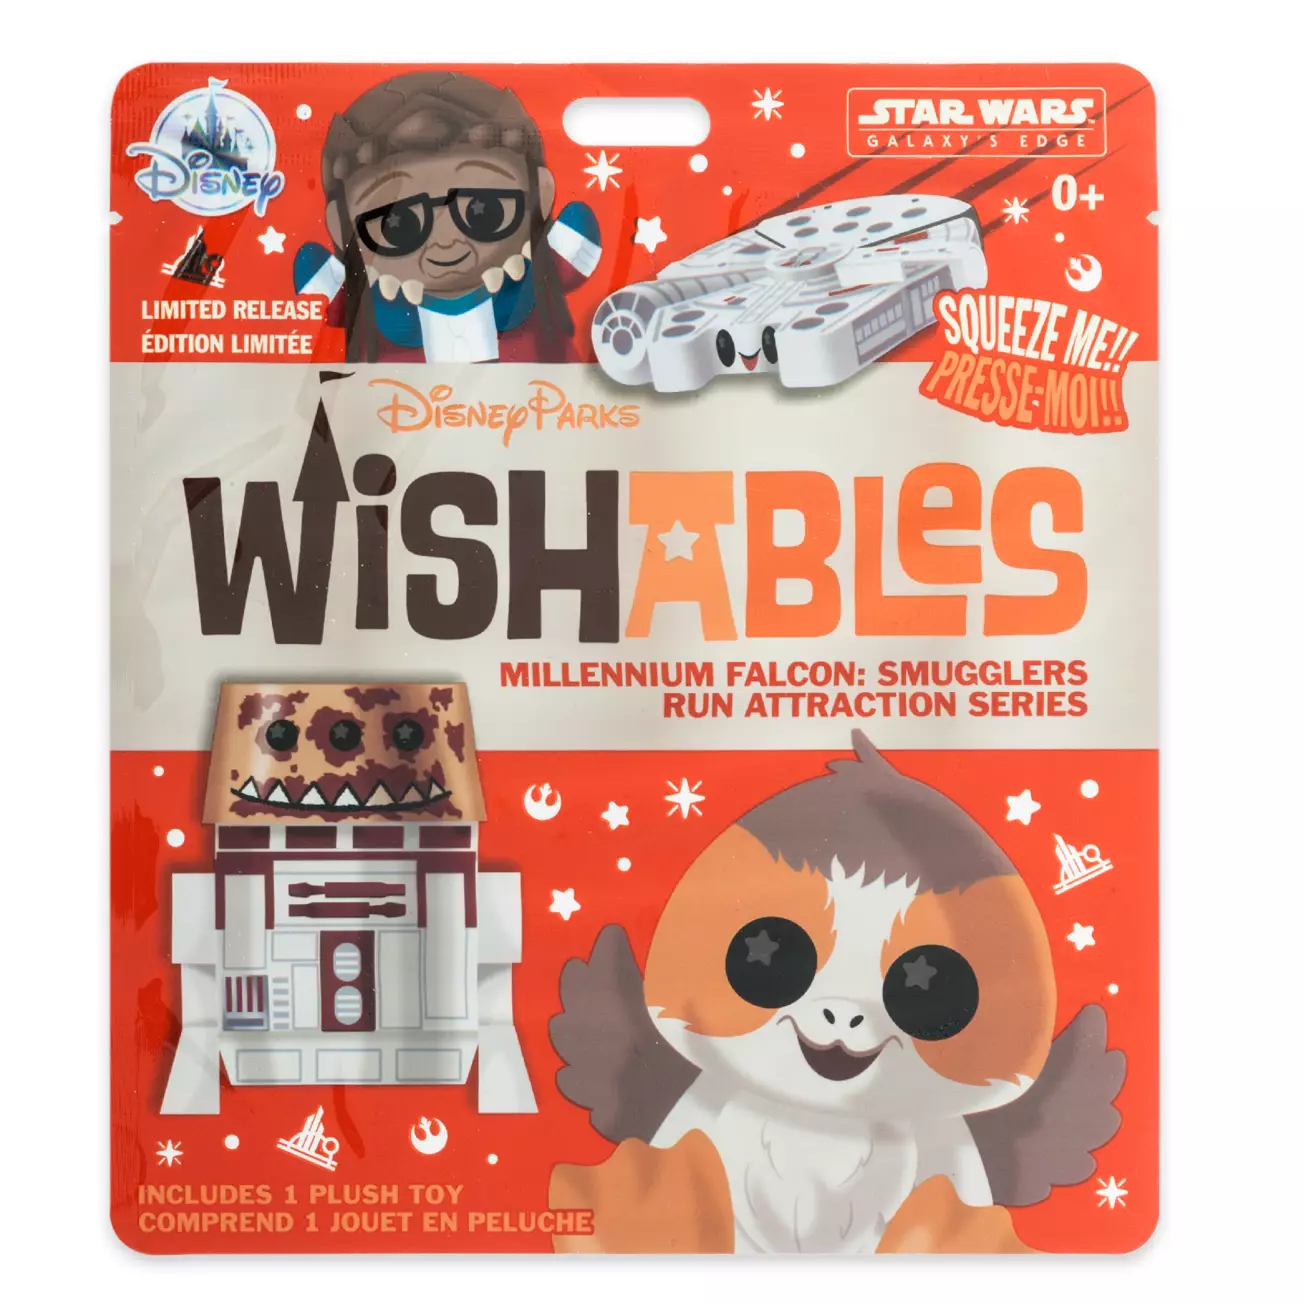 SWGE Millennium Falcon: Smugglers Run Wishables Plush Toy 4-Pack 1